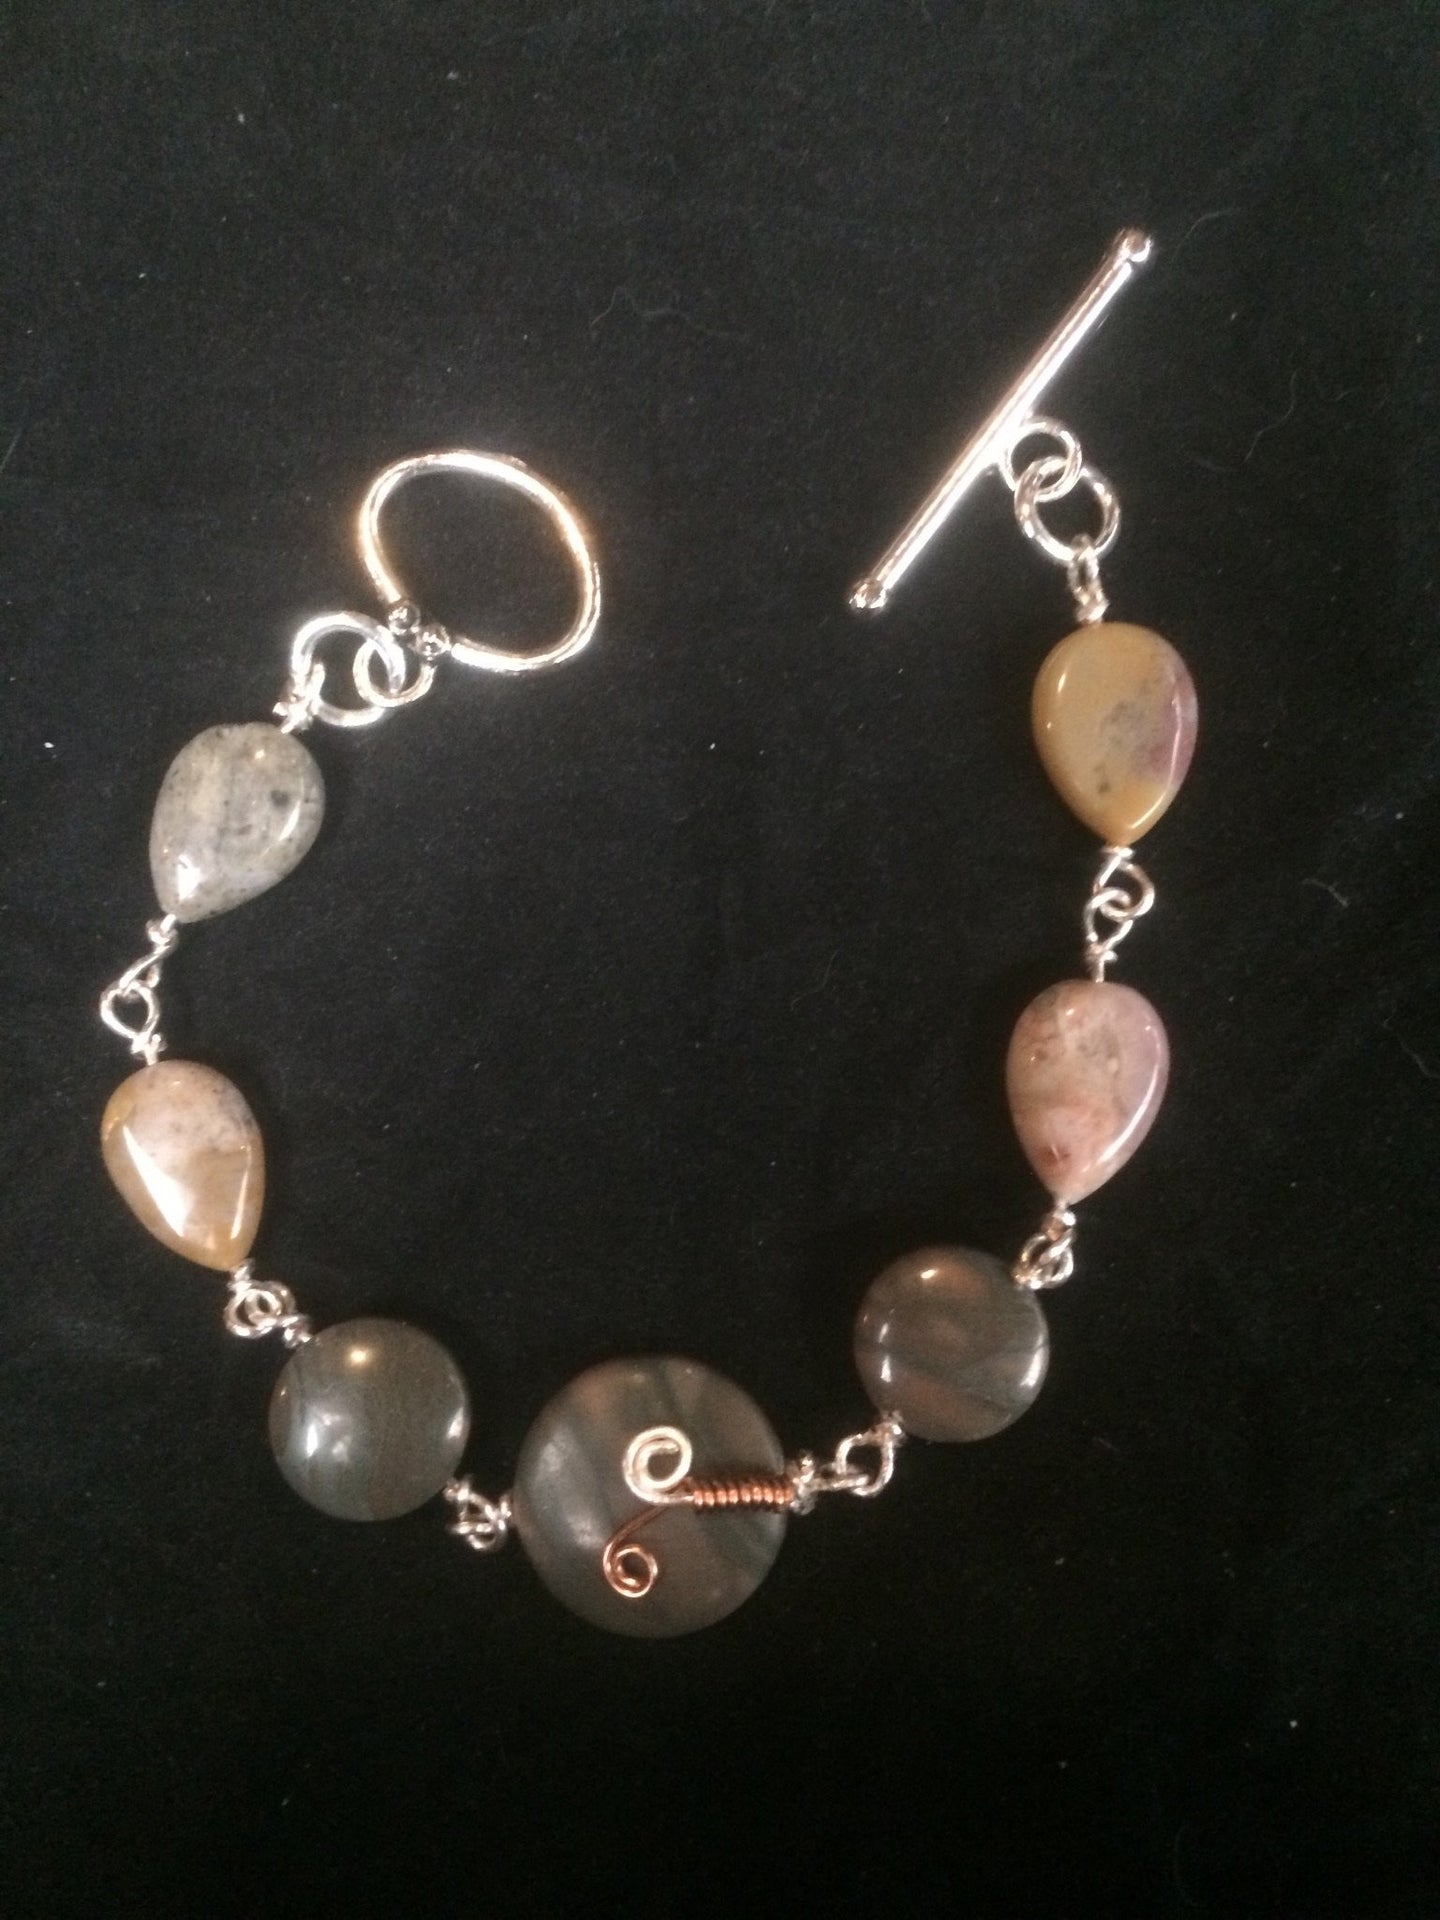 Four 15x10mm teardrop shaped agate beads lead away from two 13mm agate disk beads and an 18mm focal agate bead adorned with a copper sprout wire wrap pattern. A matching silver plated 20x13mm oval toggle clasp completes this 8